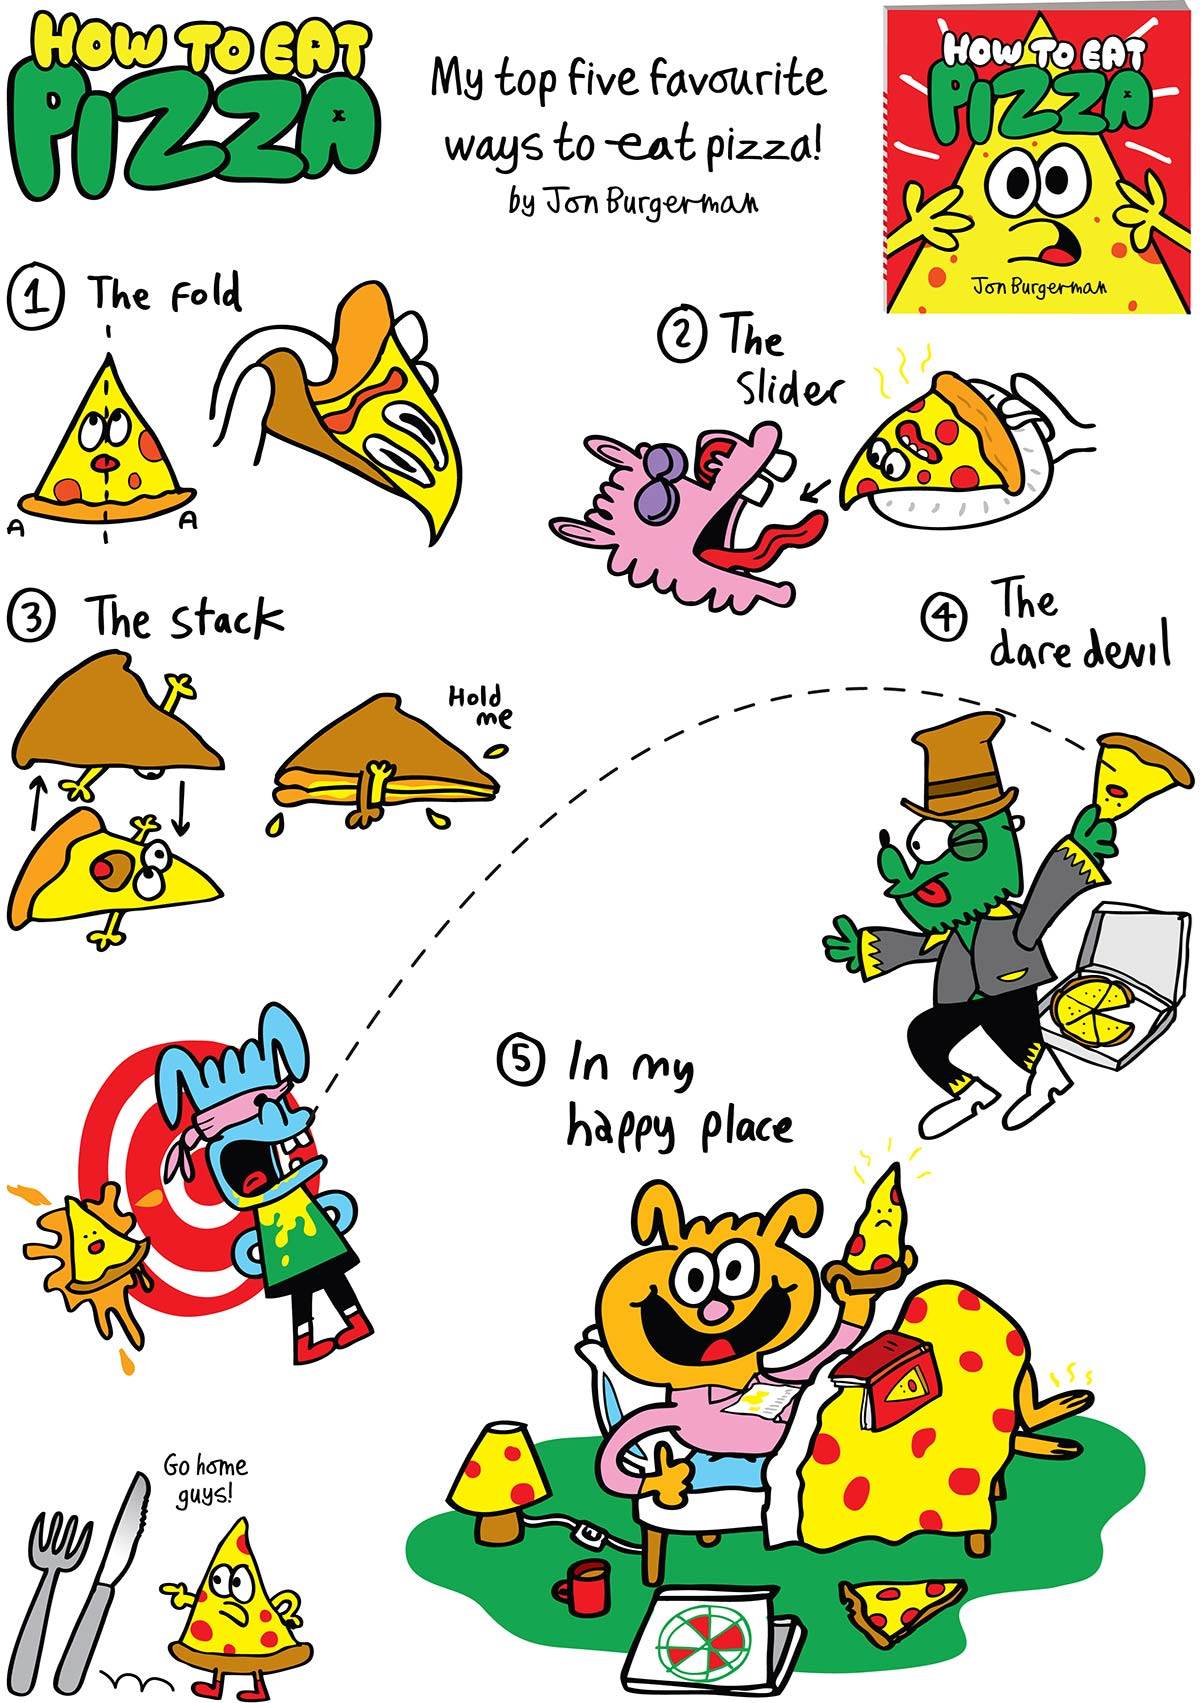 5 ways to eat pizza